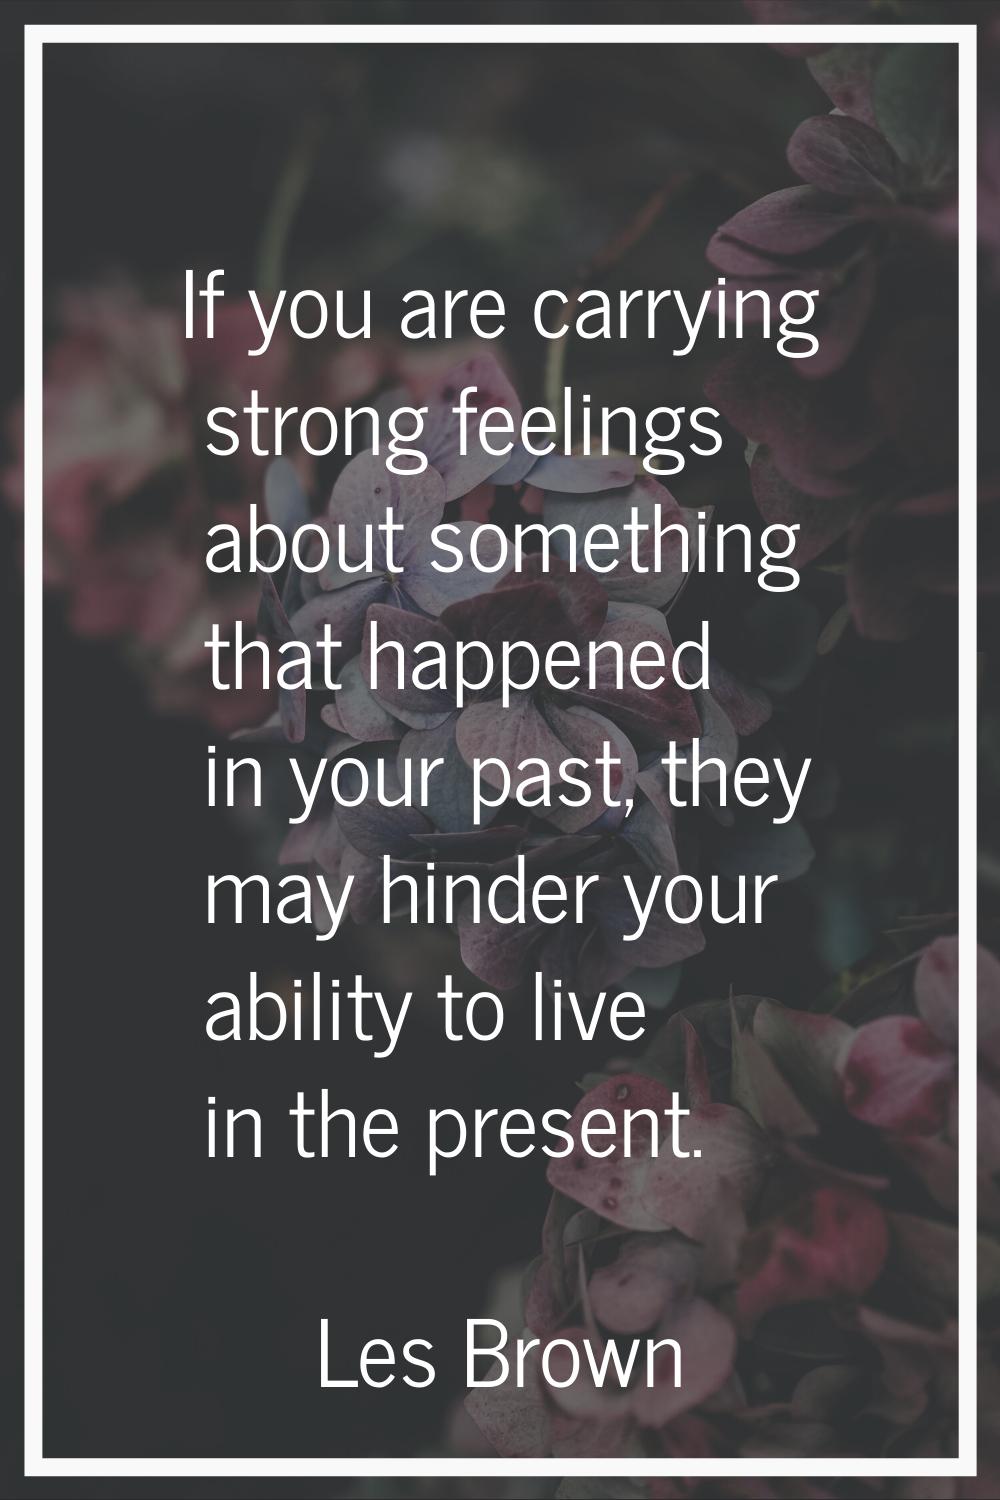 If you are carrying strong feelings about something that happened in your past, they may hinder you